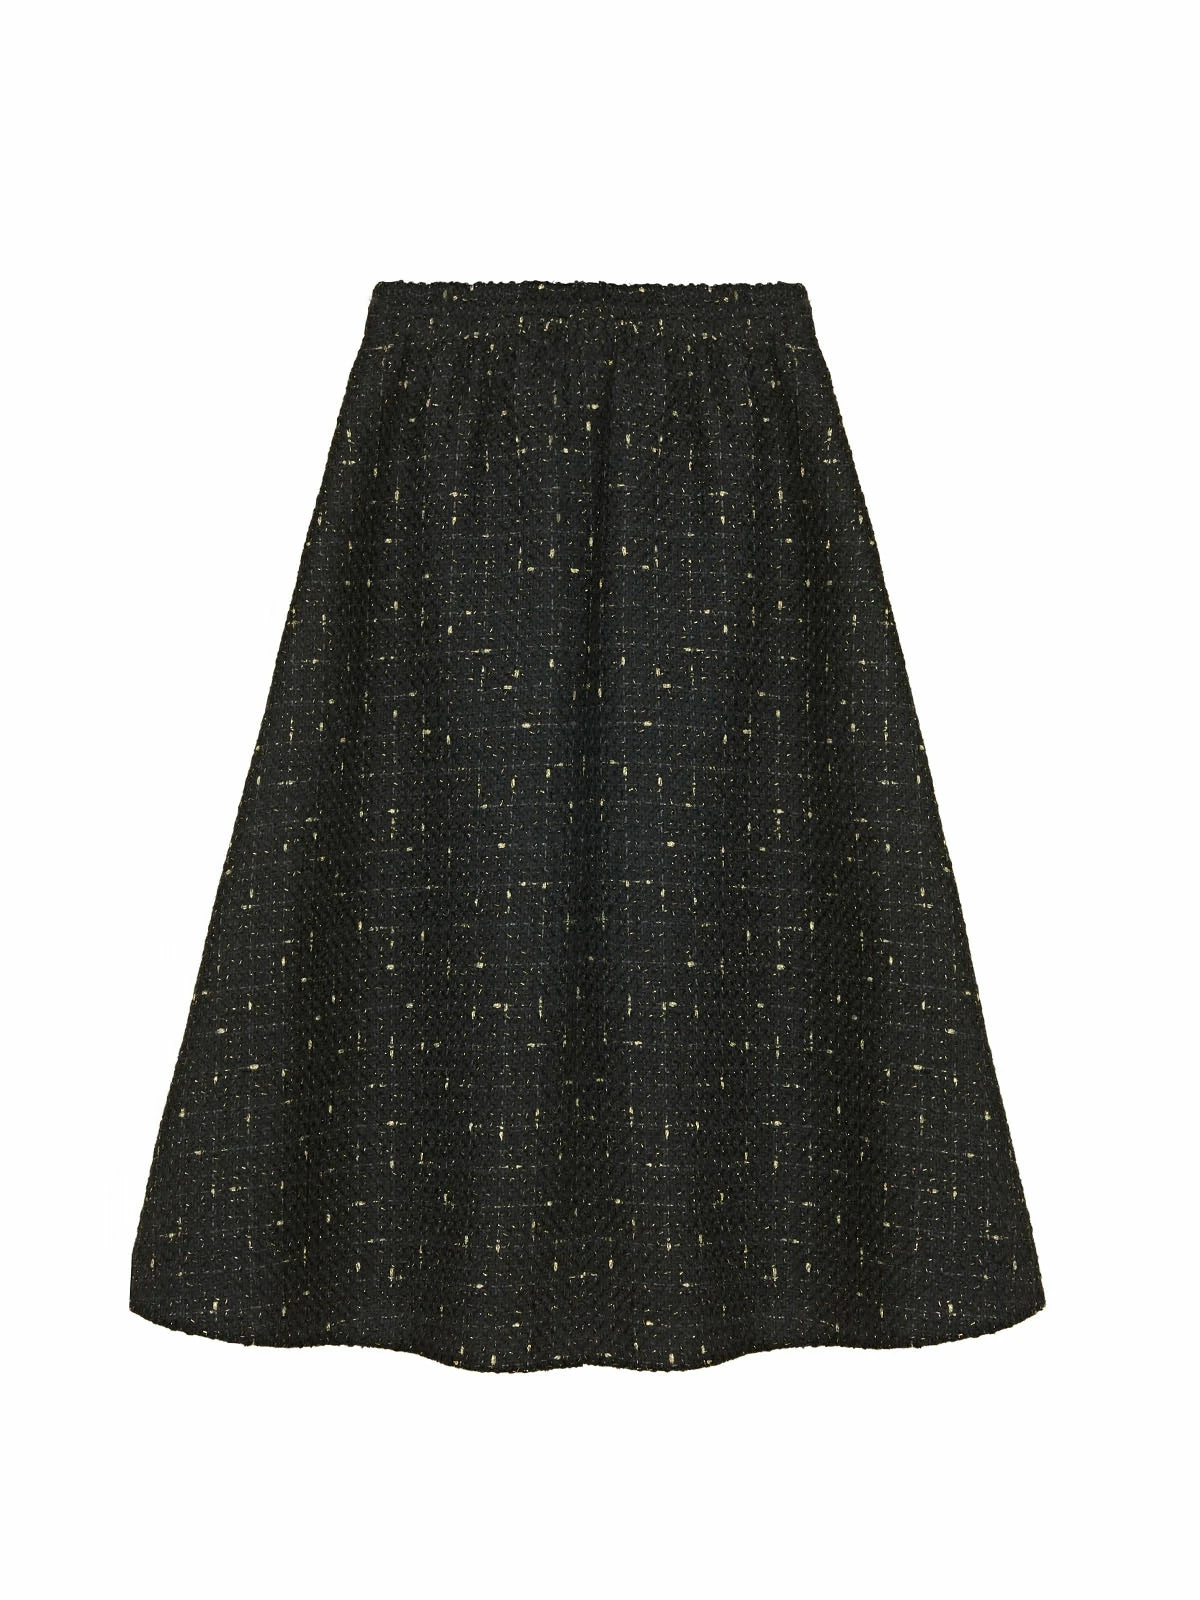 Meticulously crafted textured skirt for a chic and refined look